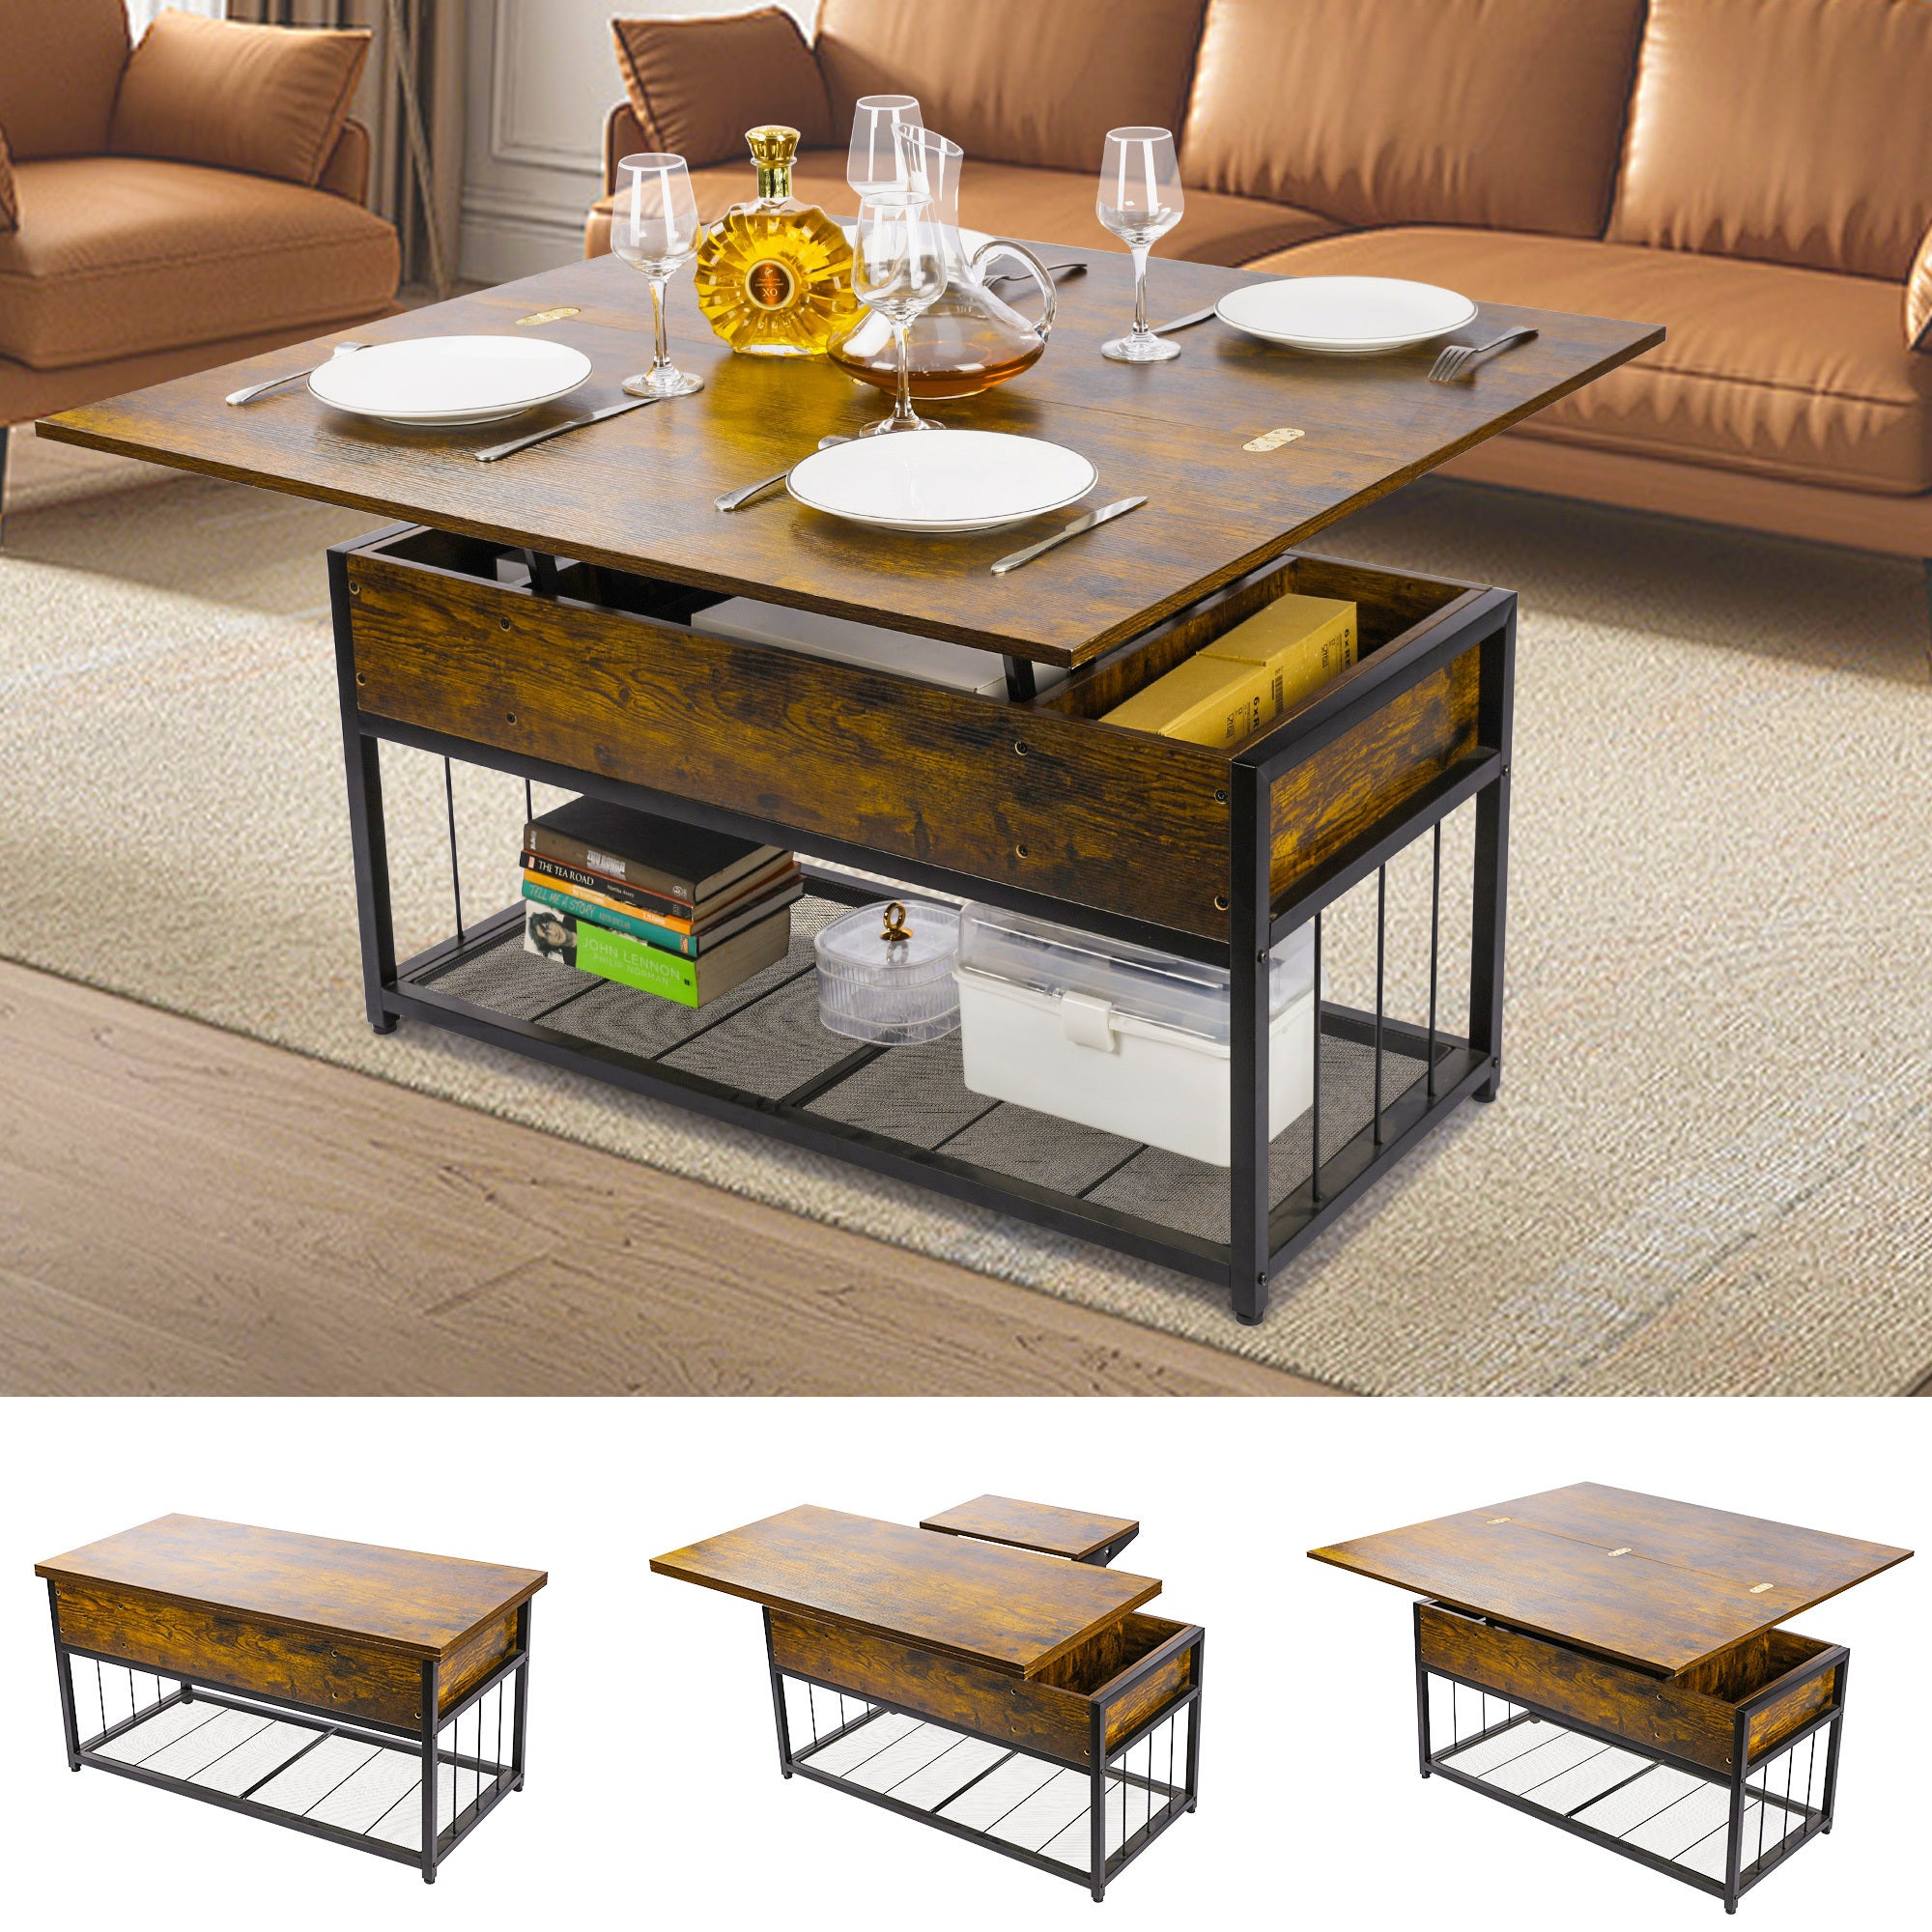 Lift Top Coffee Table With Storage Shelves And